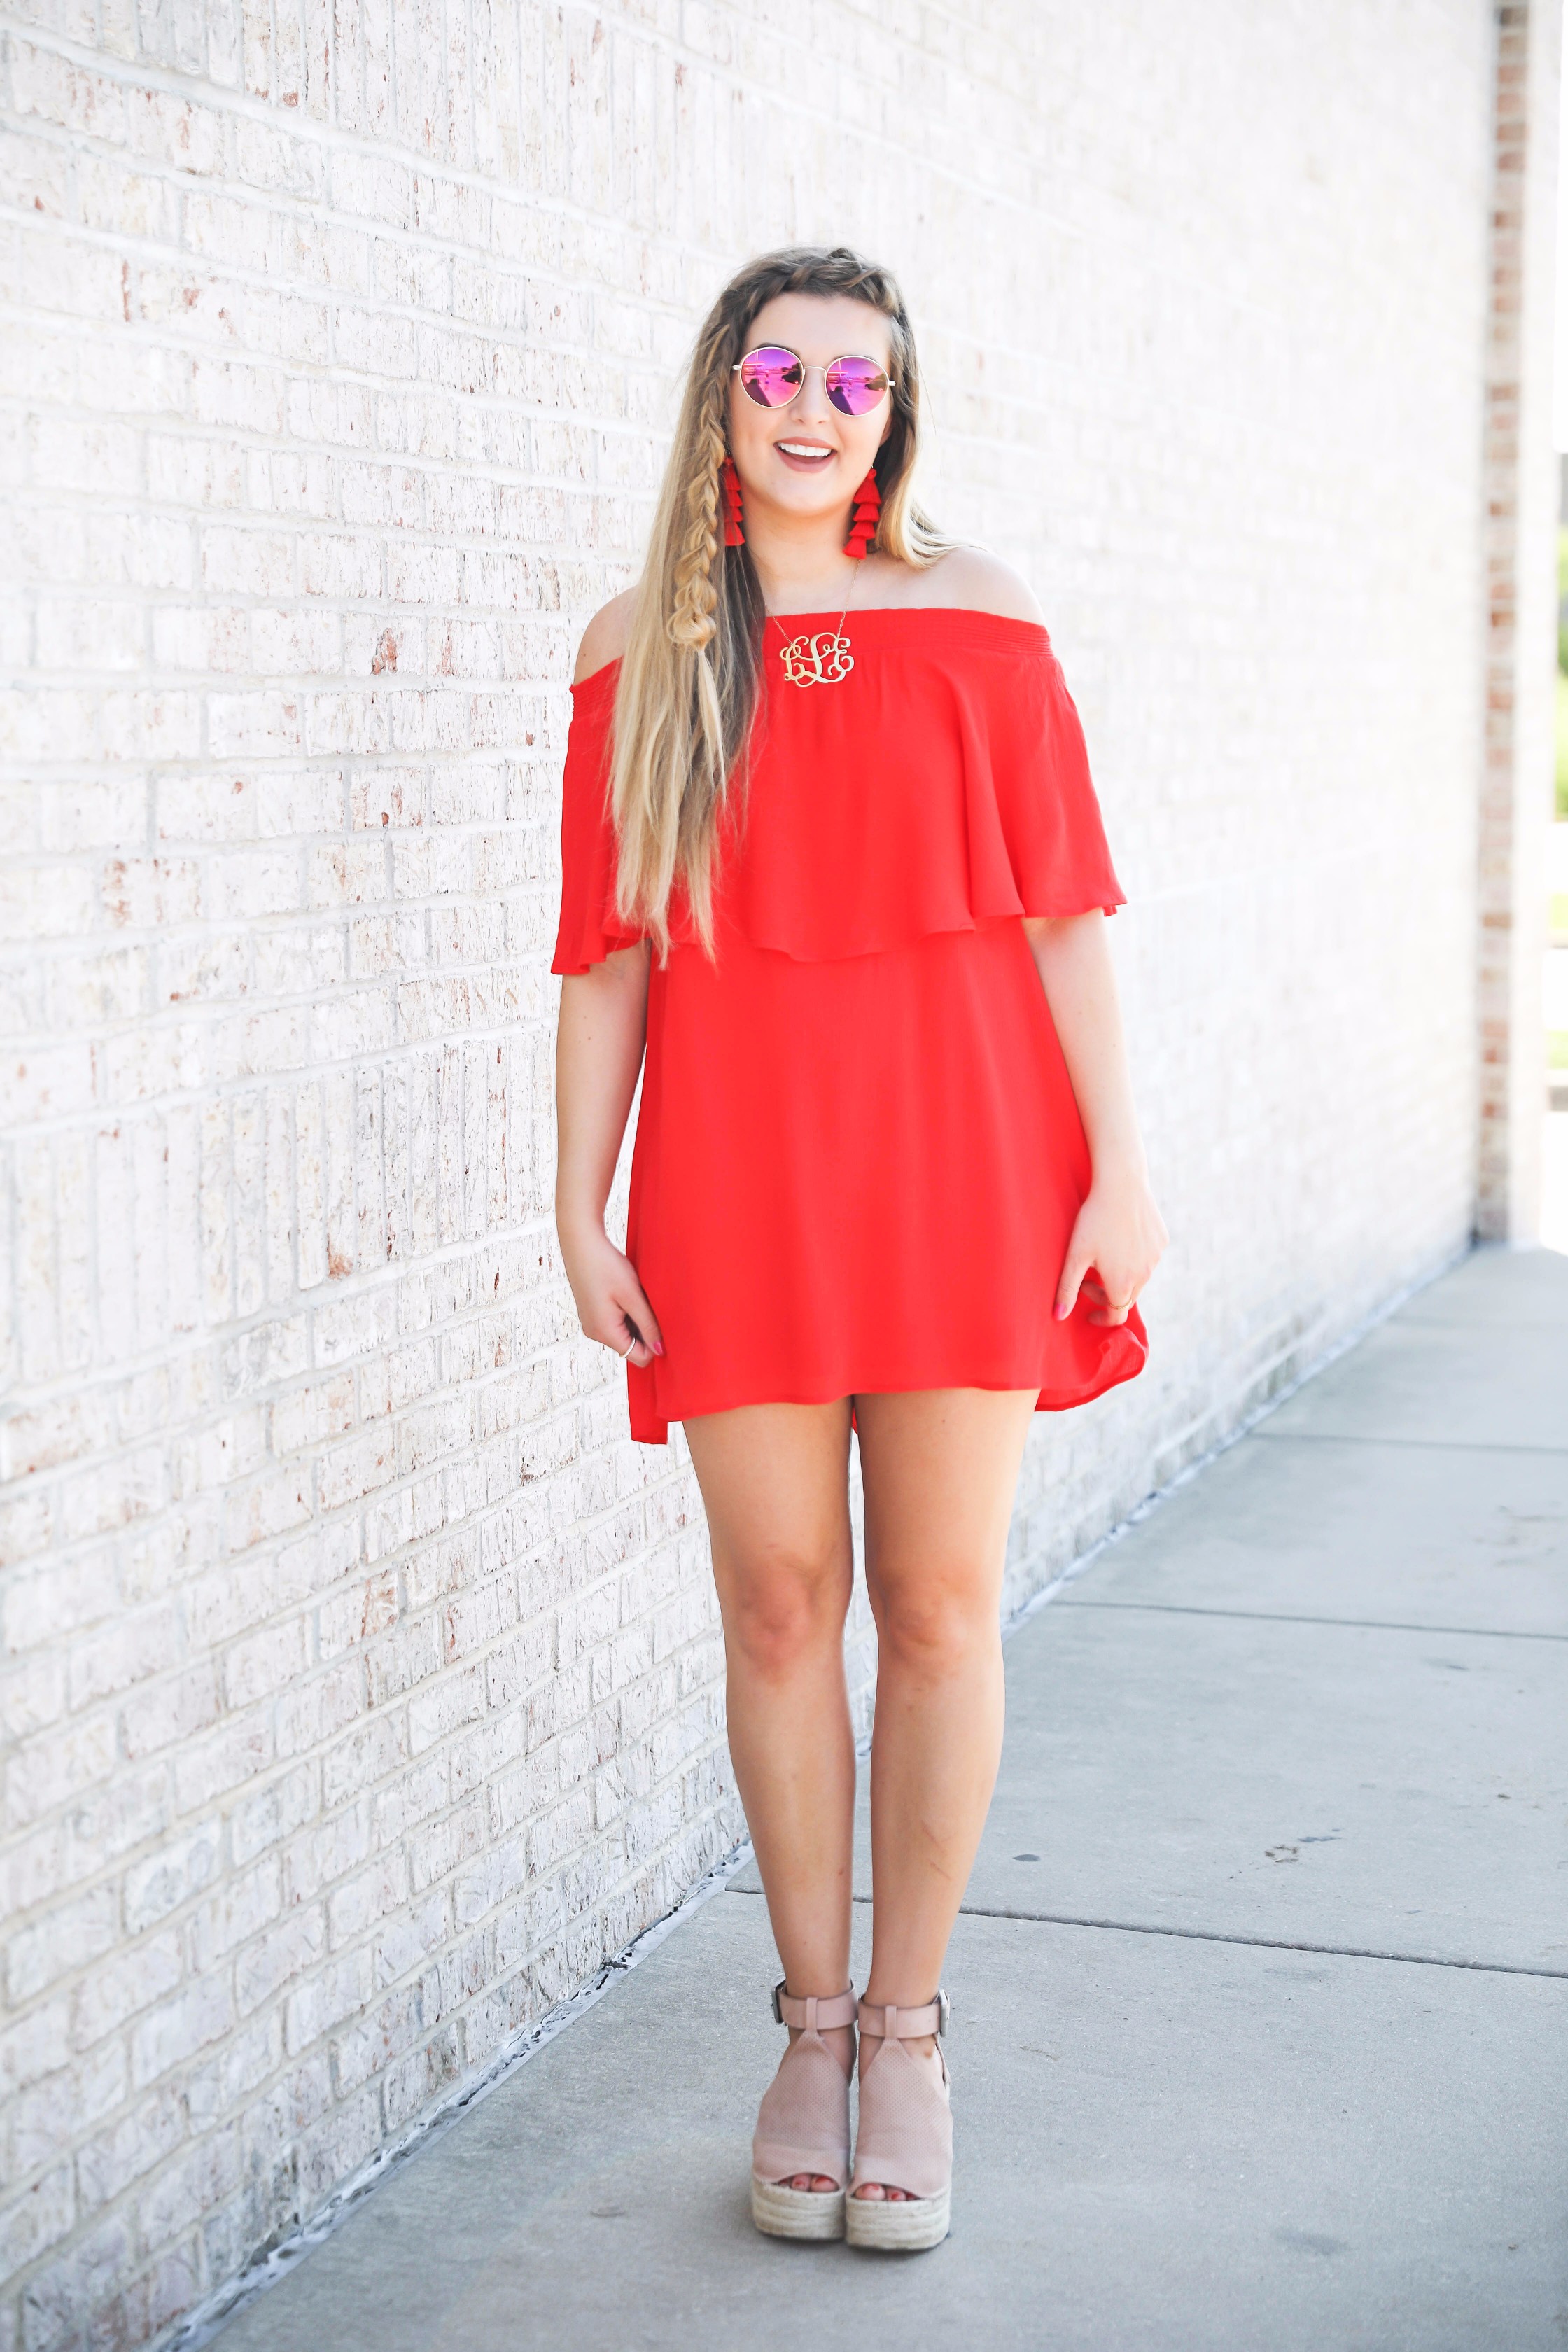 Red off the shoulder dress y Show Me Your MuMu! The cutest dress for summer paired with red tassel earrings, red circle sunglasses, and wedges. Braided fish tail hair. By fashion blogger lauren lindmark daily dose of charm